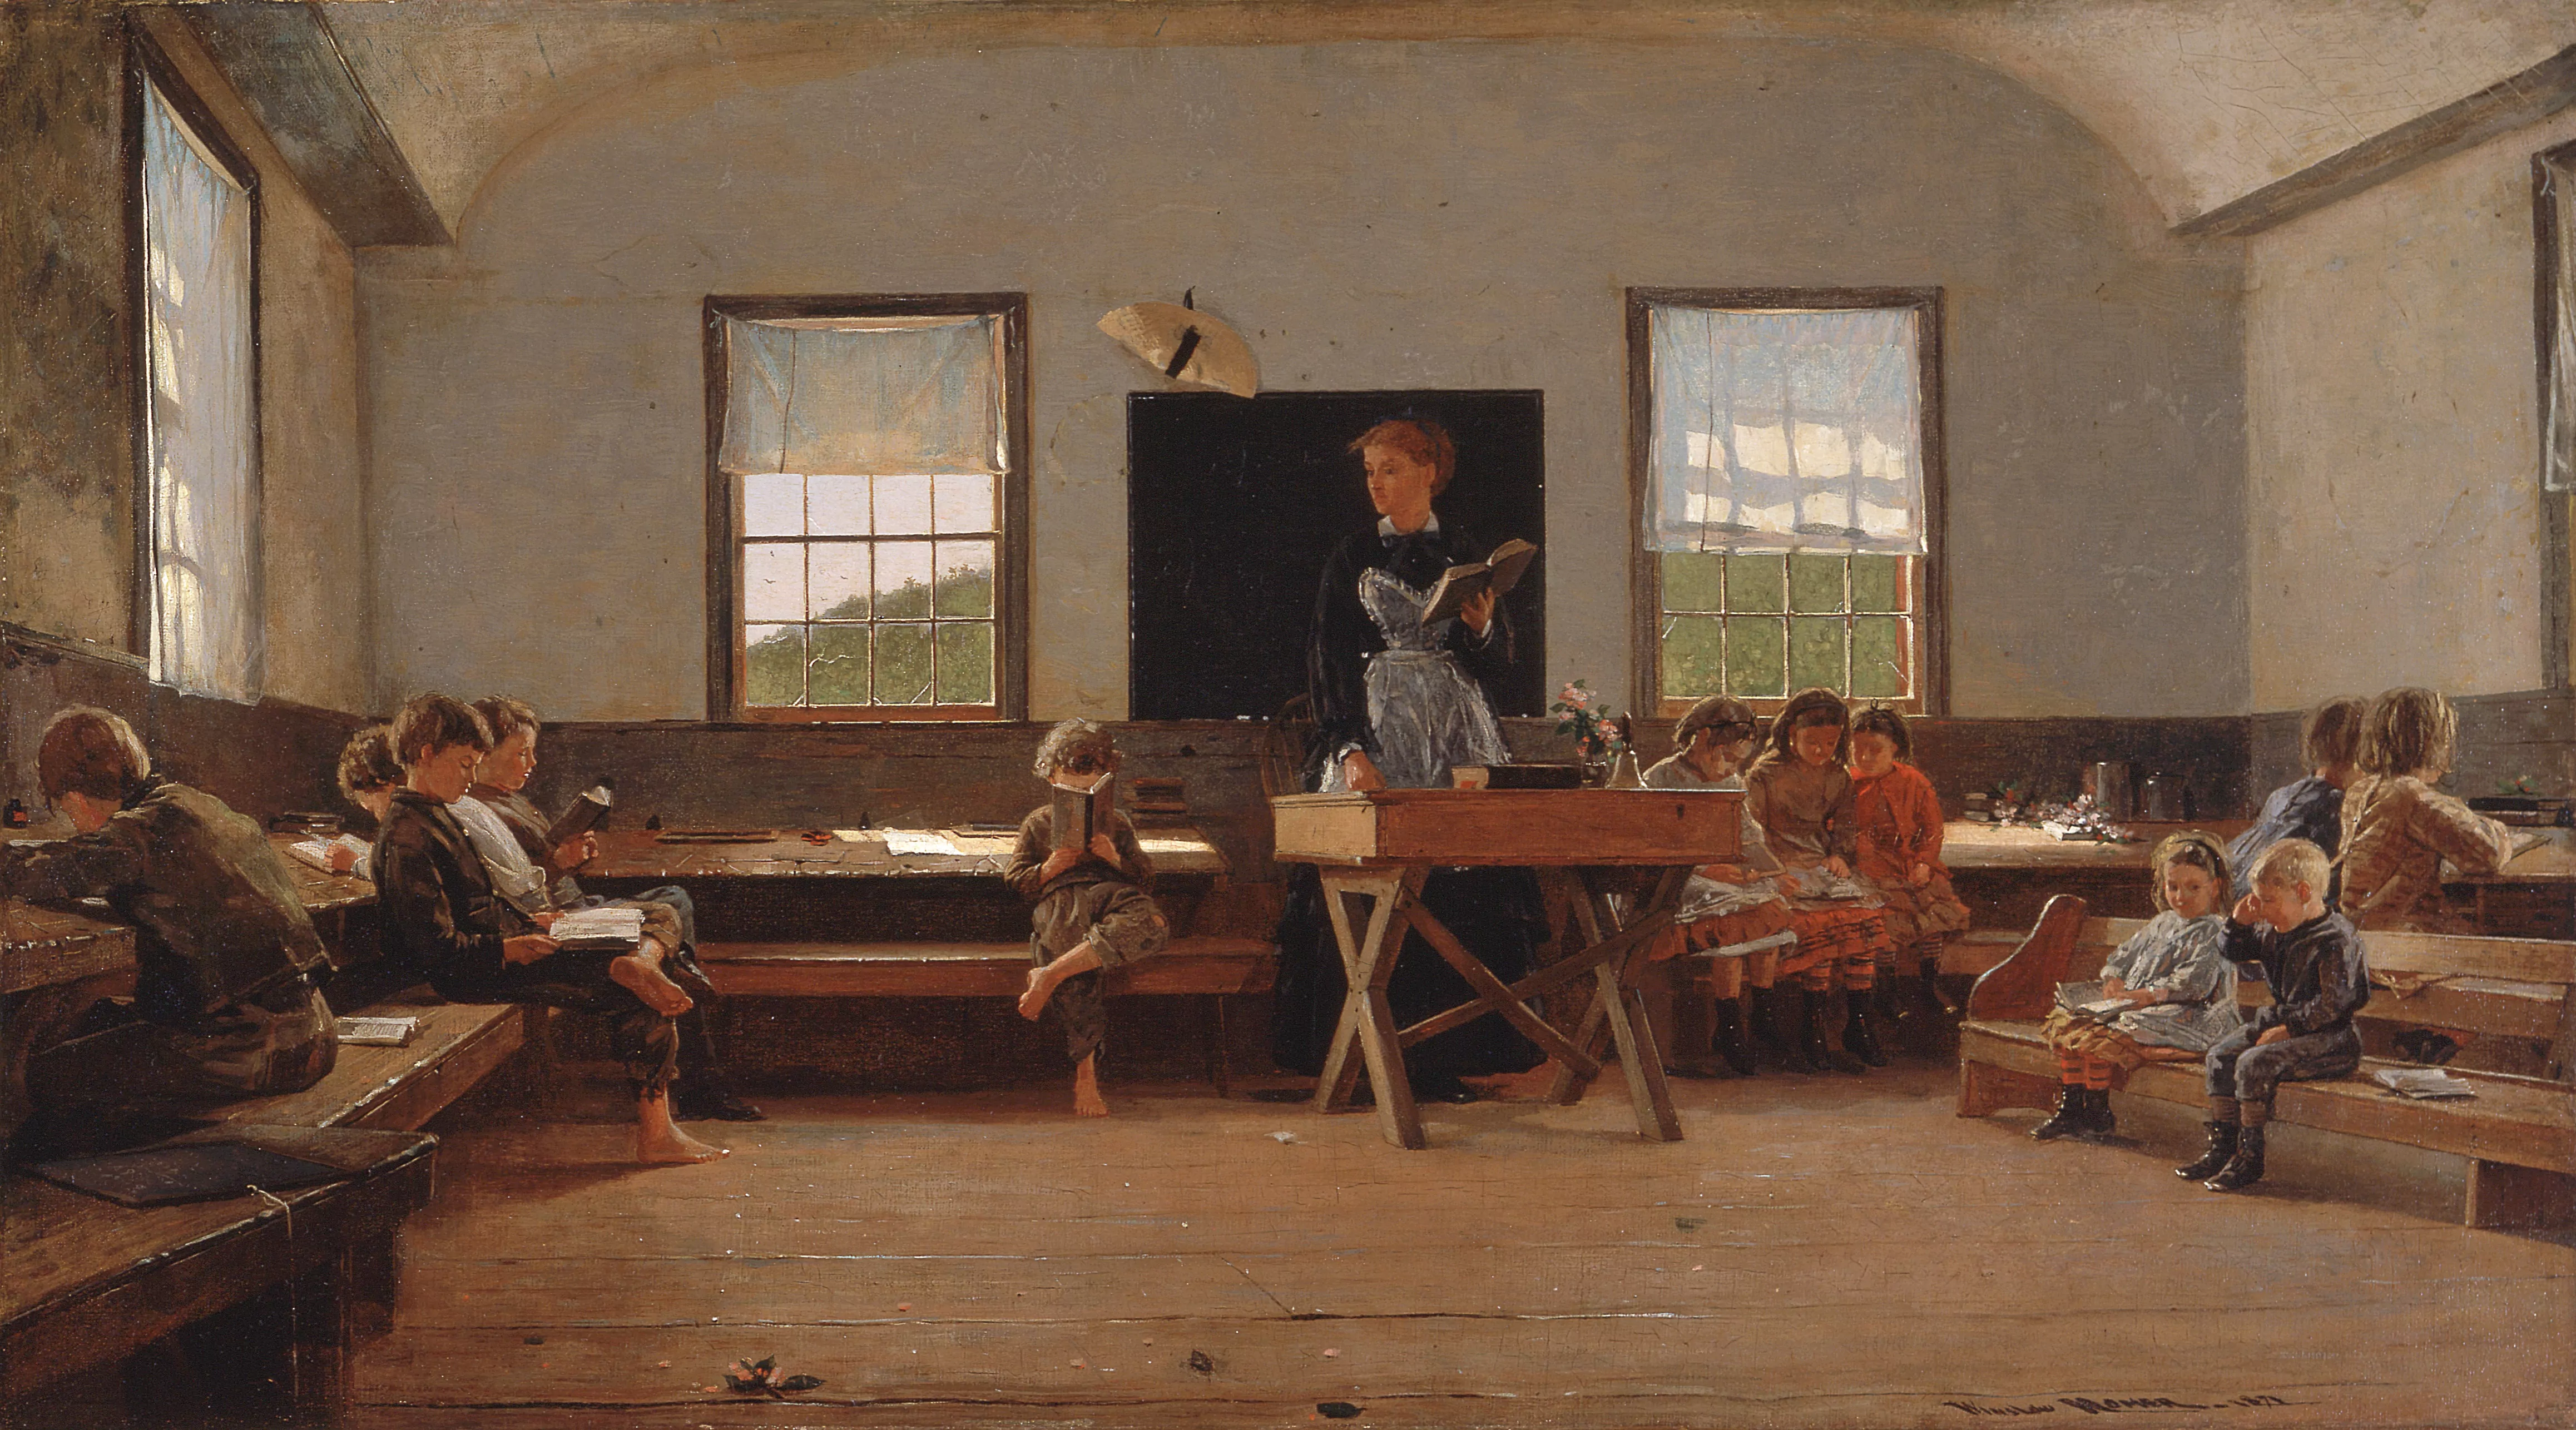 The Country School, Winslow Homer